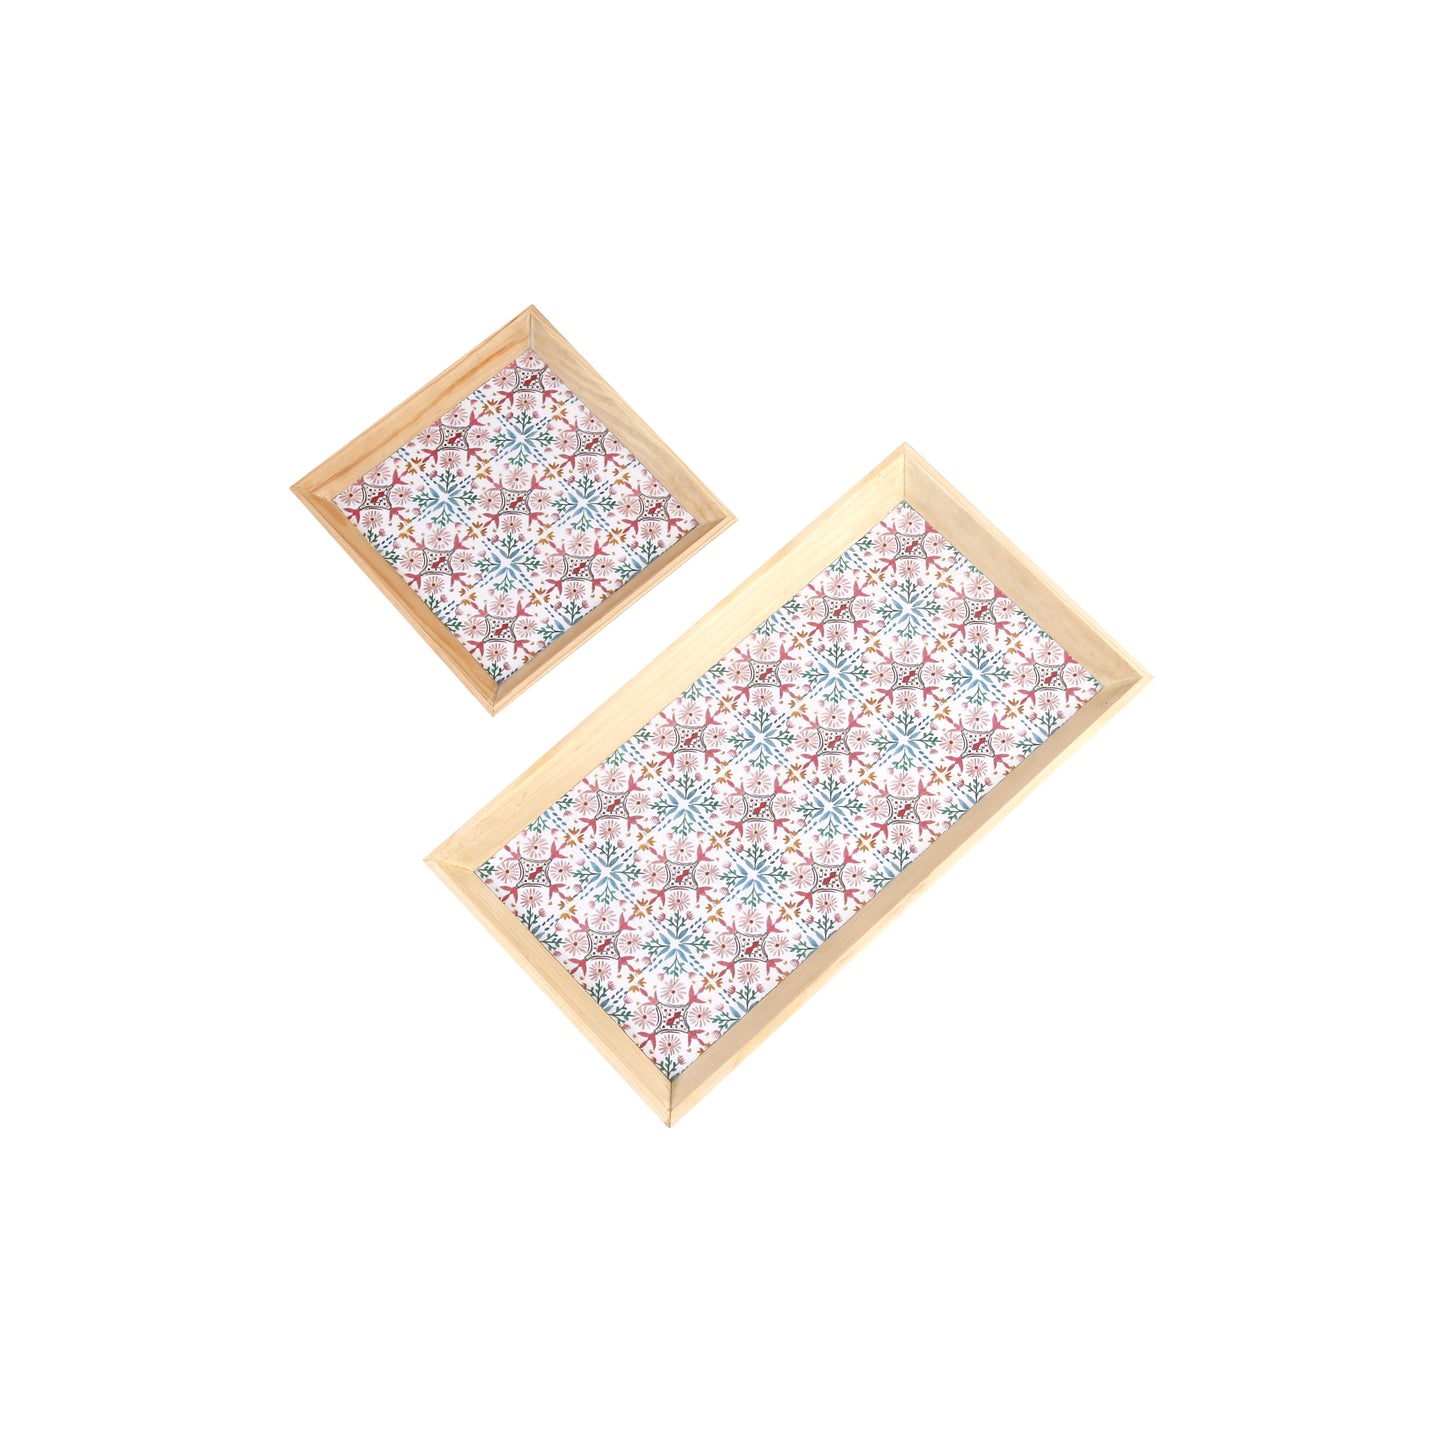 A Tiny Mistake Turkish Pink Tiles Small Square Wooden Serving Tray, 18 x 18 x 2 cm